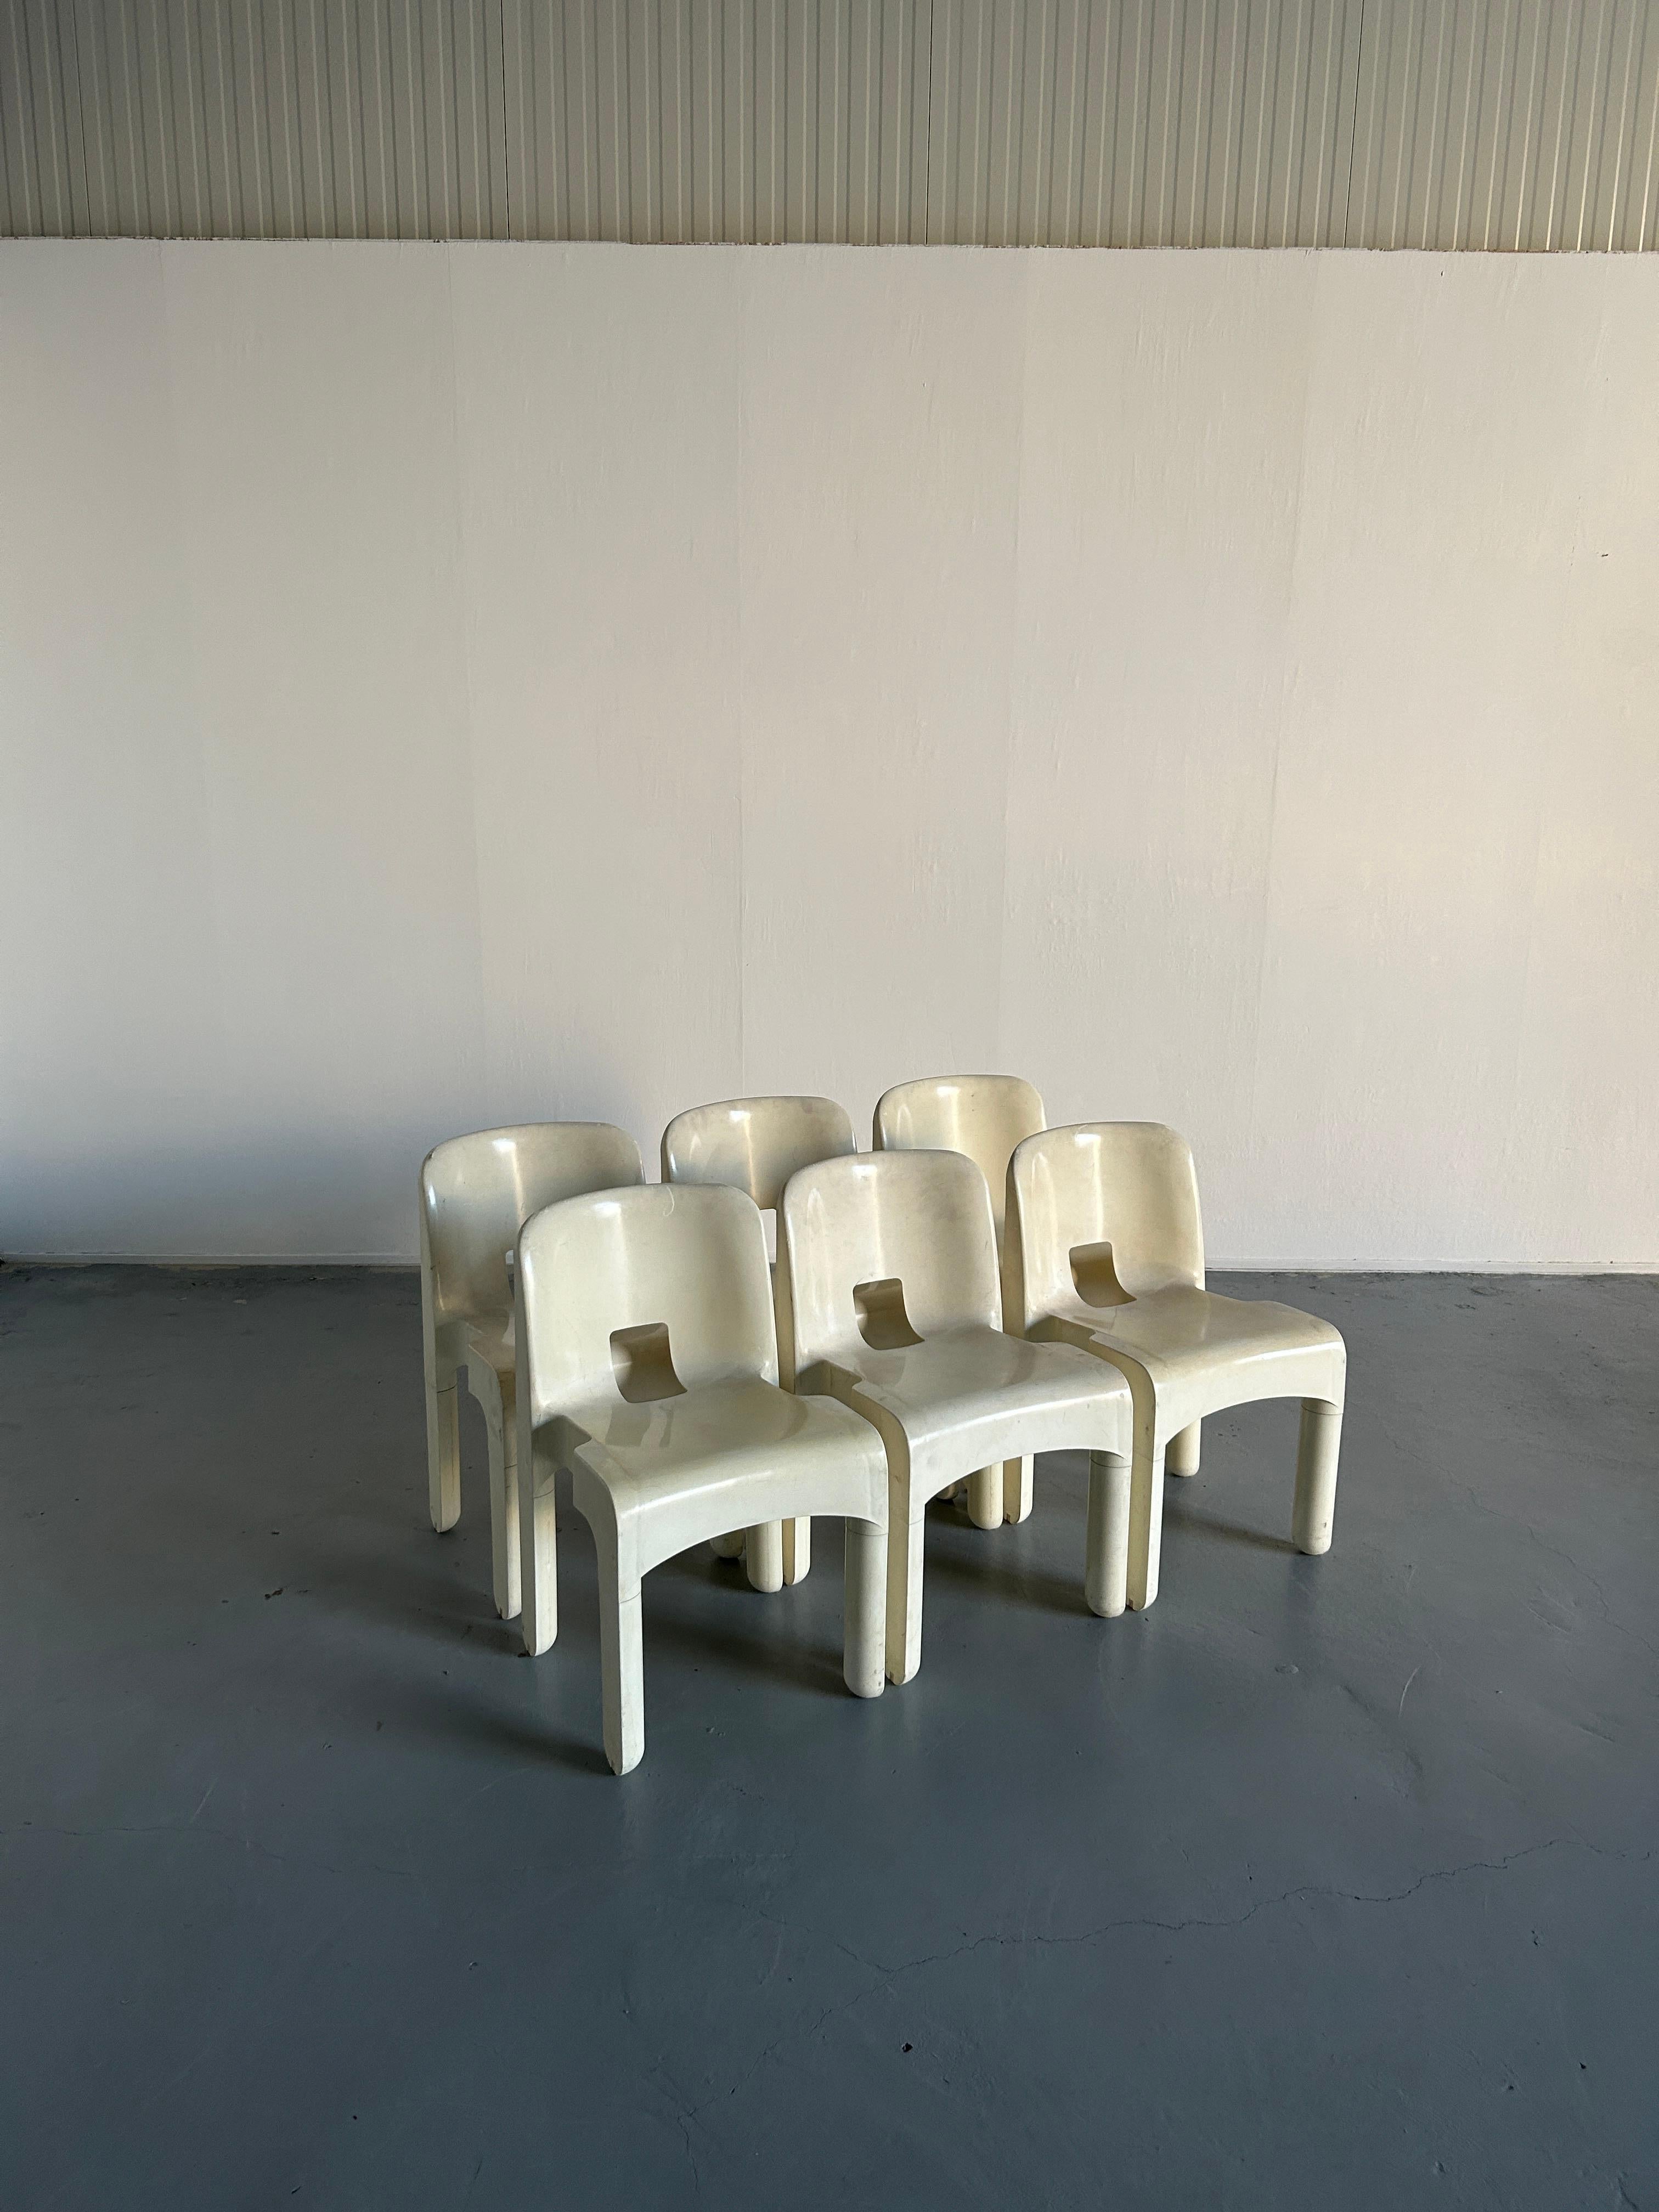 1 of 6 Joe Colombo Model '4867' or 'Universale' White Edition Chairs for Kartell 3